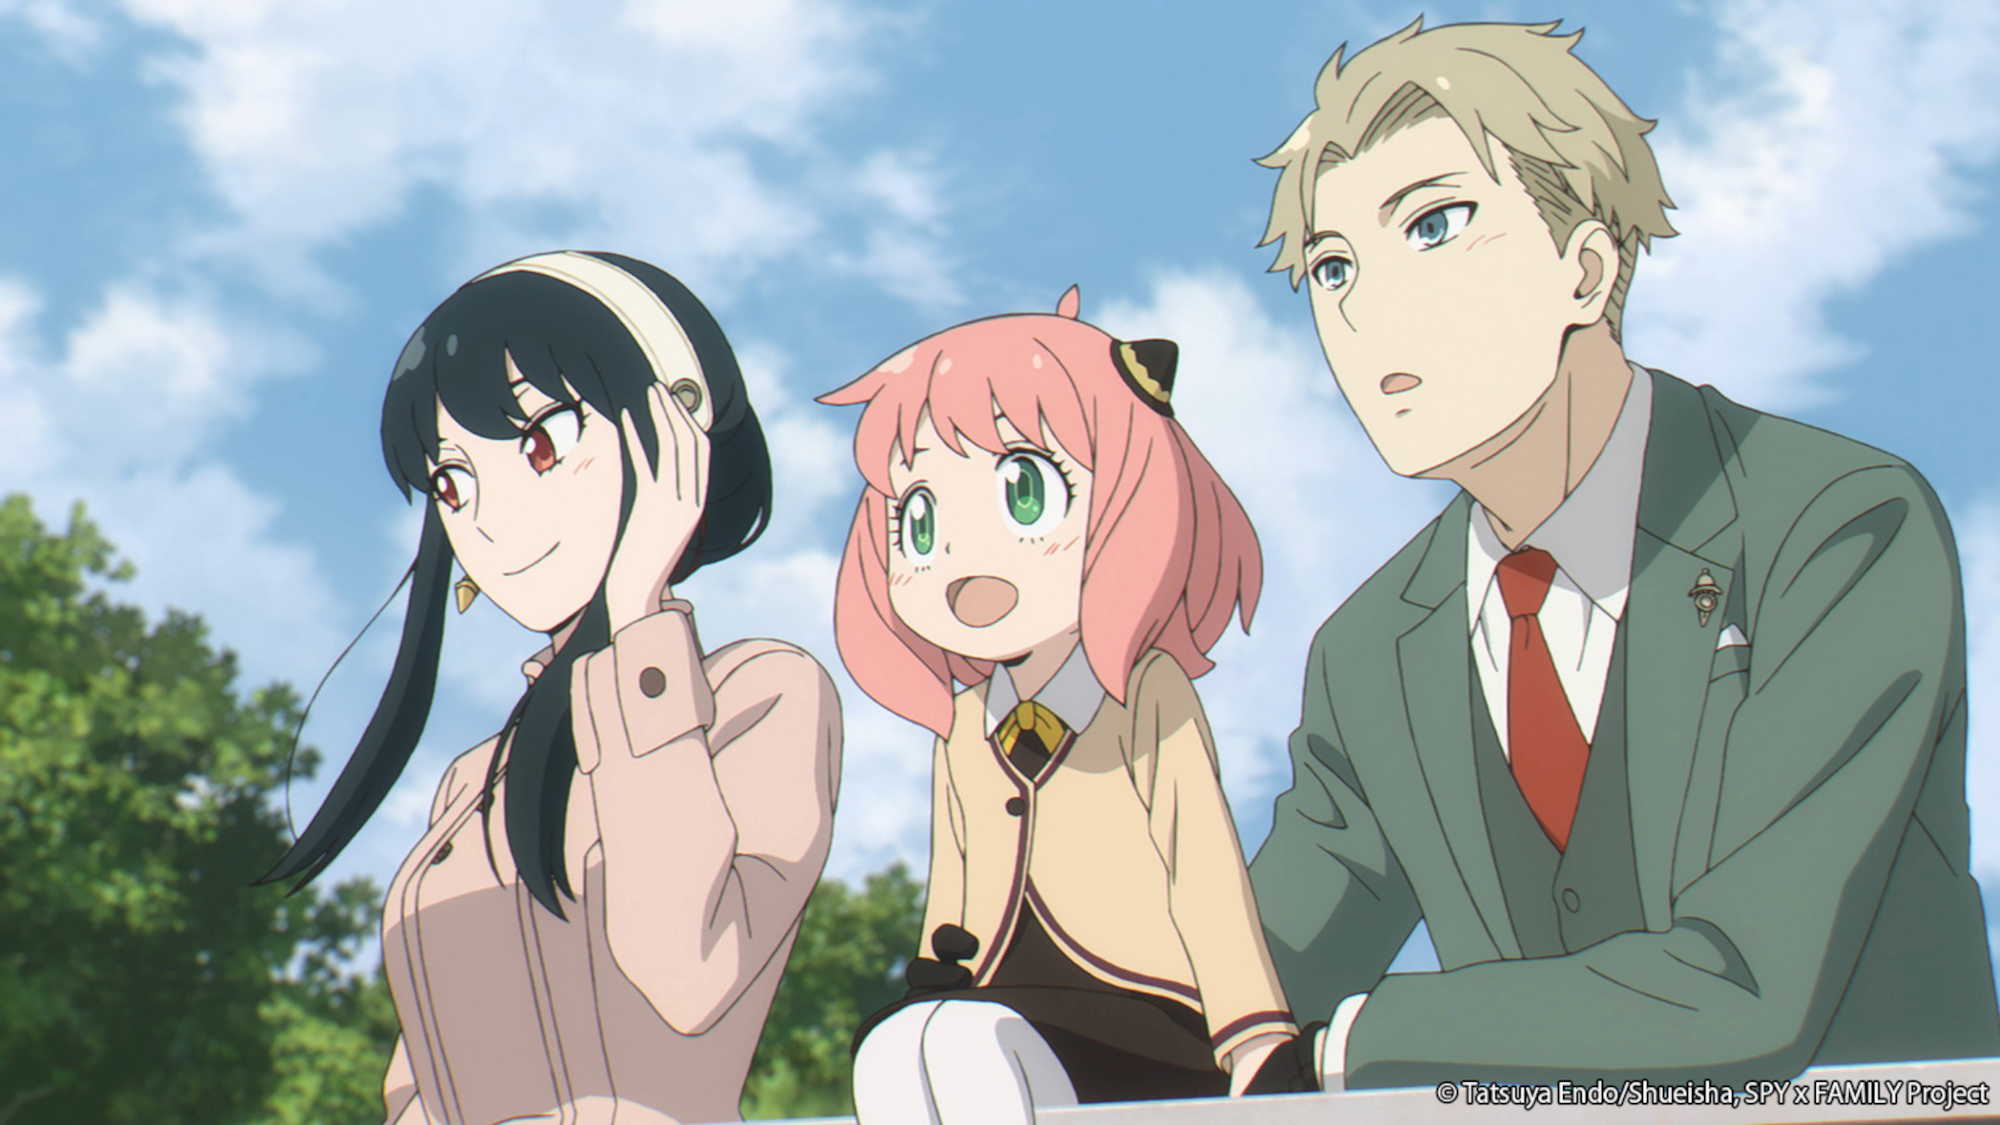 Yor, Anya, and Loid Forger in an episode of 'Spy x Family' Season 1. They're standing together with a blue sky in the background.